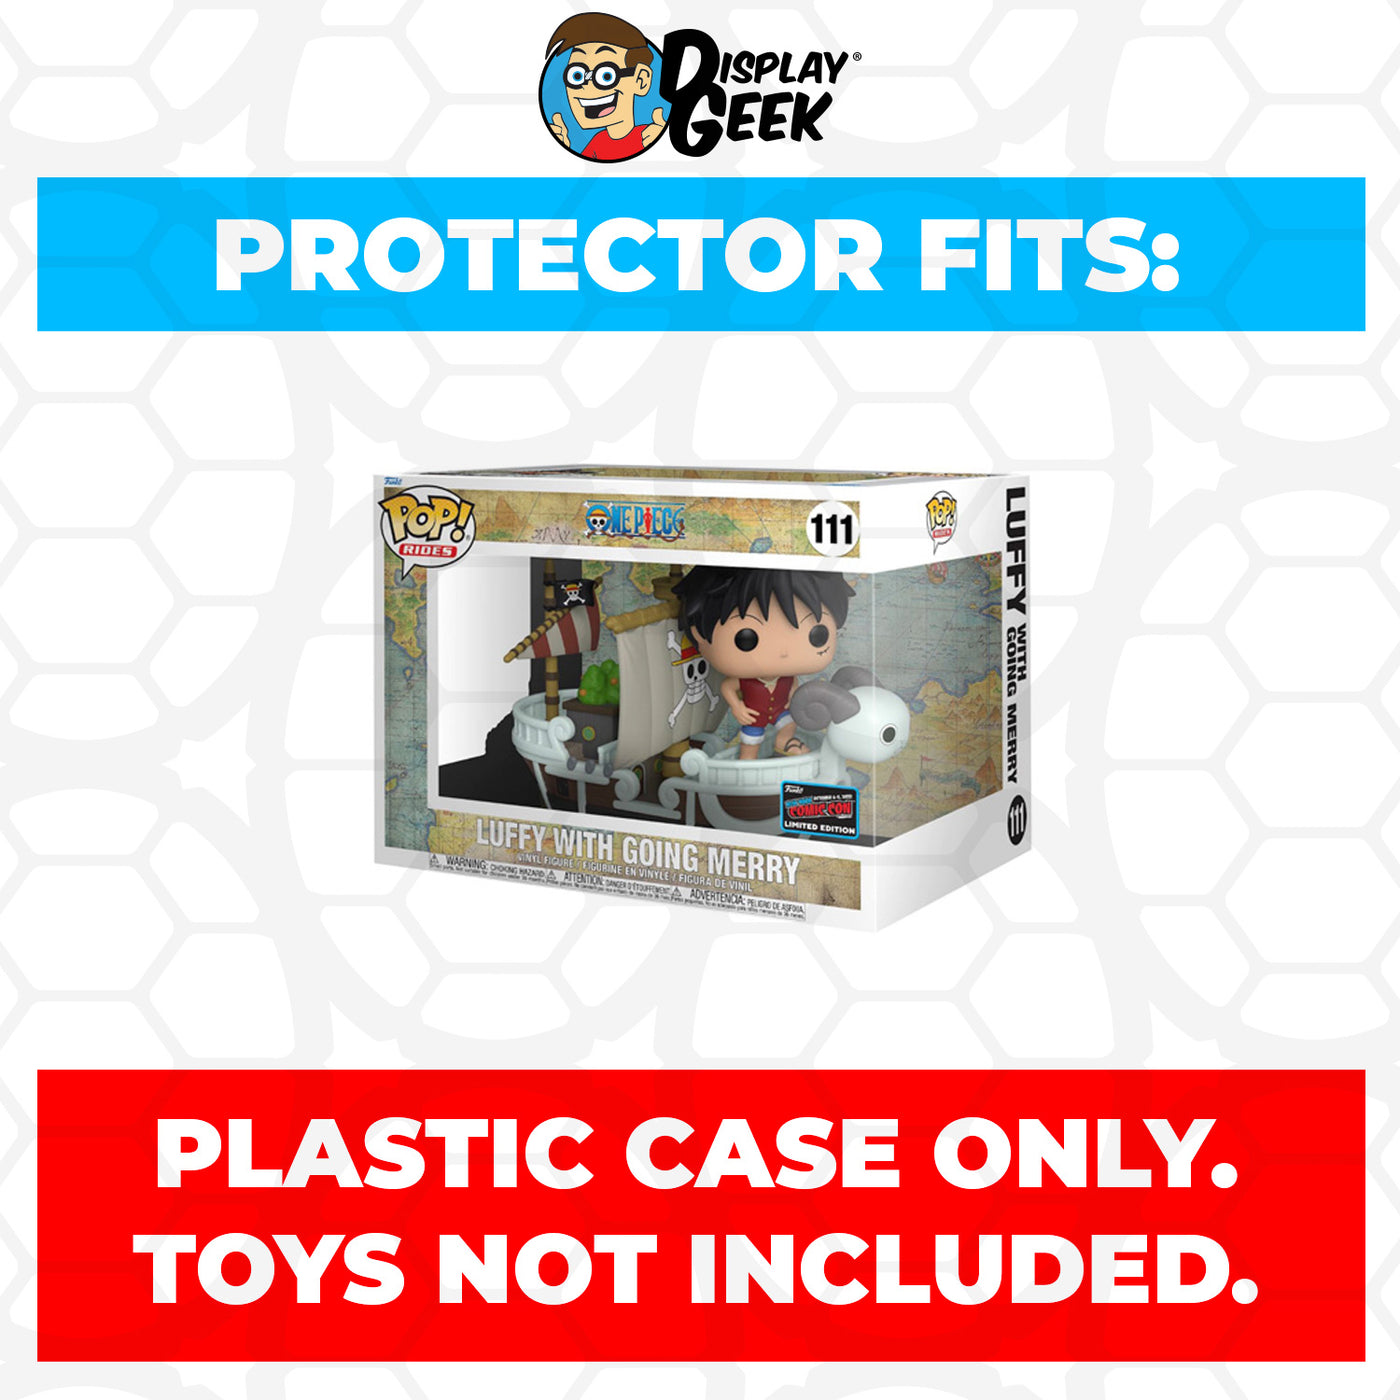 Pop Protector for One Piece Luffy with Going Merry NYCC #111 Funko Pop Rides on The Protector Guide App by Display Geek